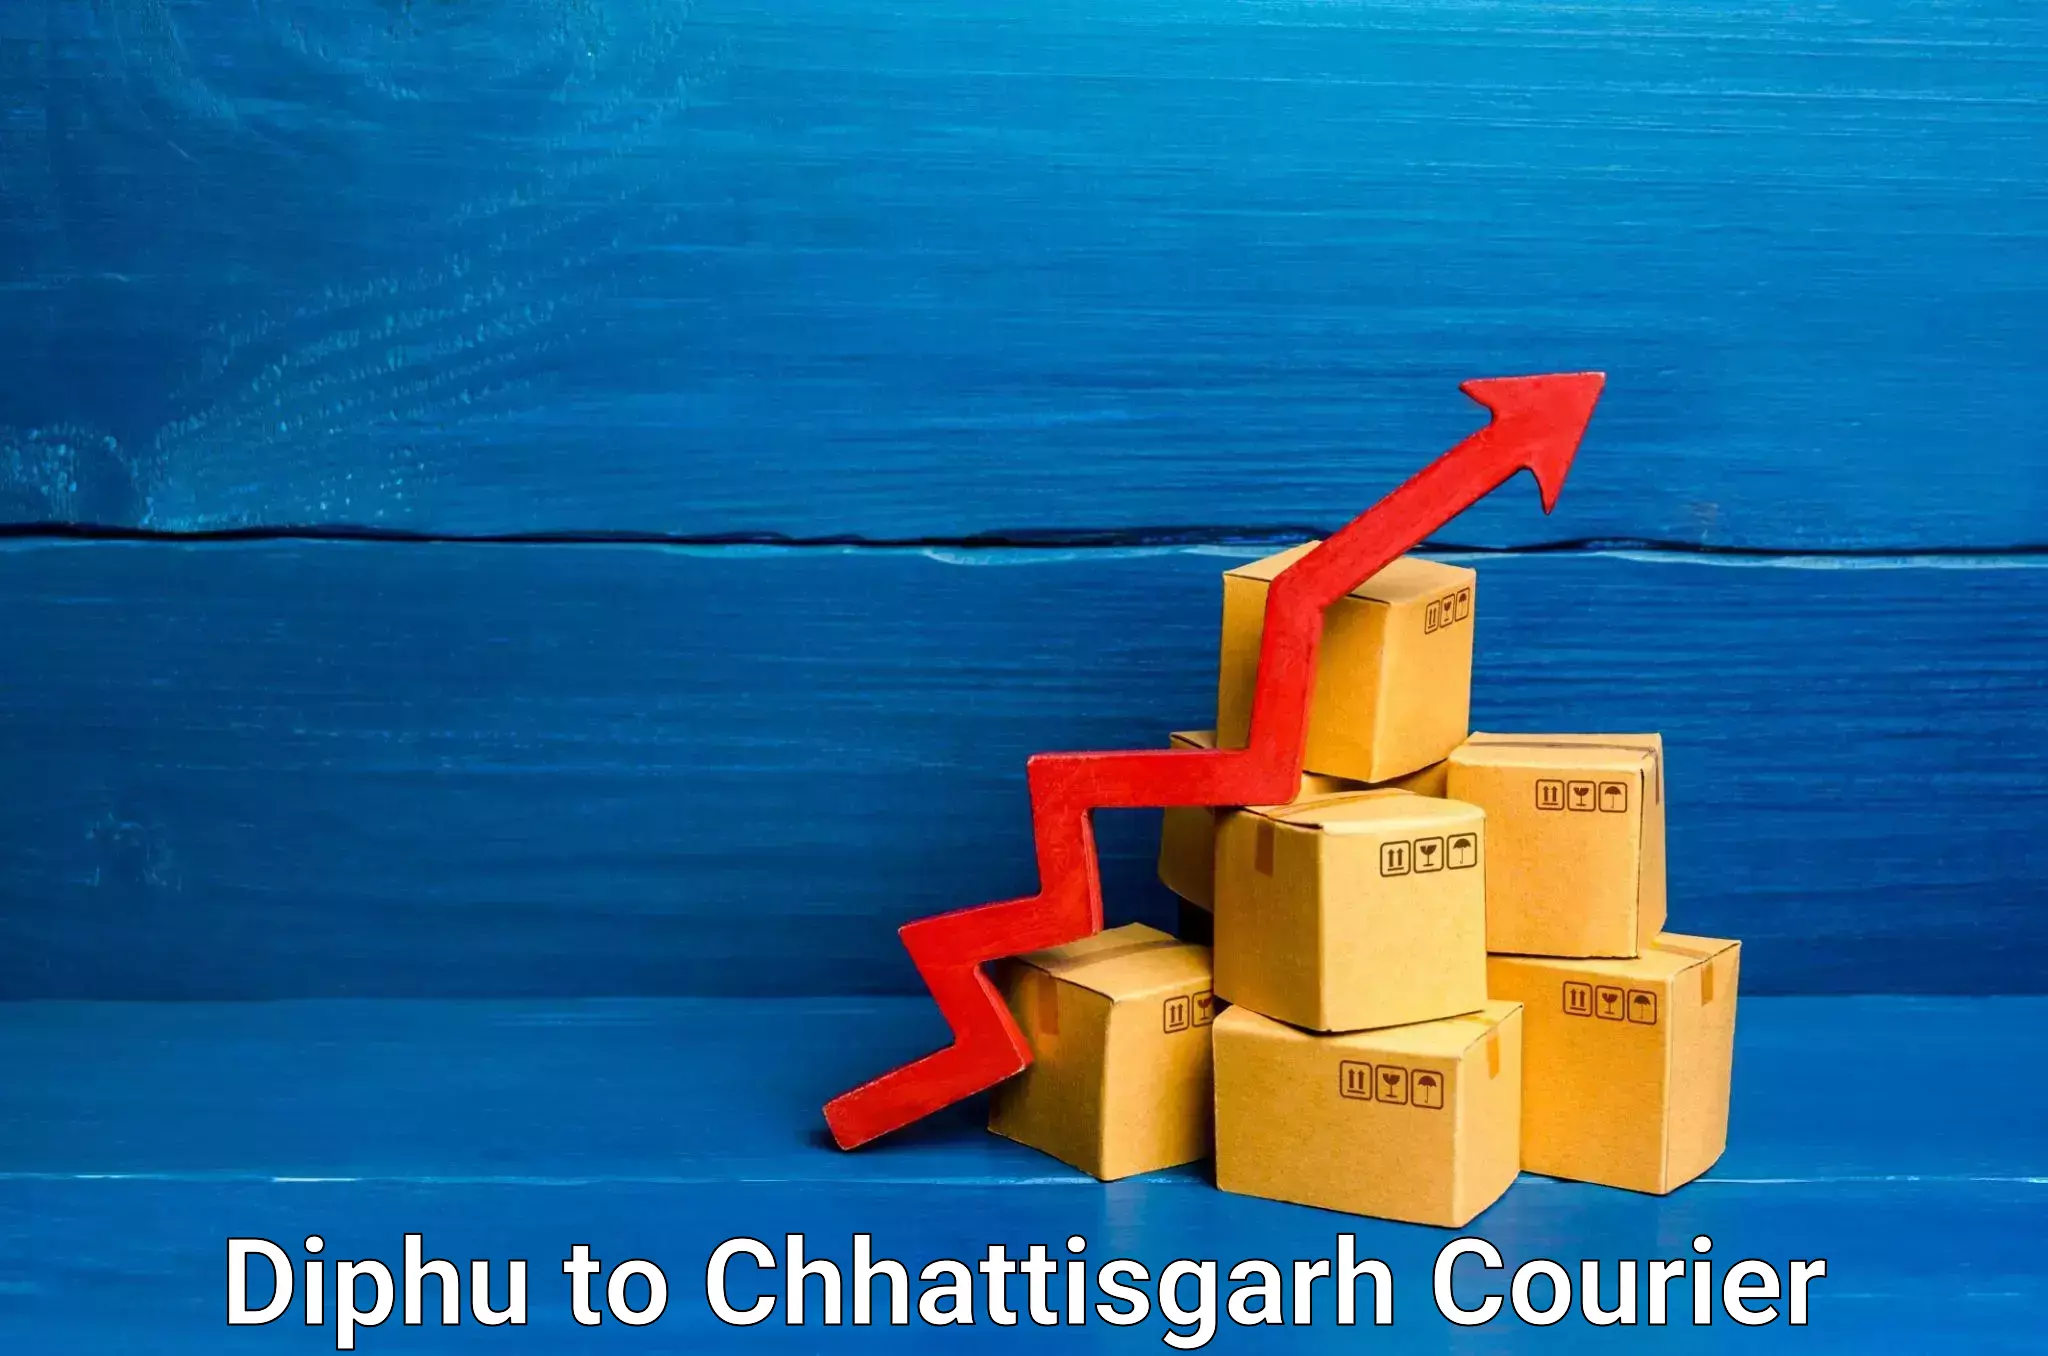 Dynamic courier operations Diphu to Raigarh